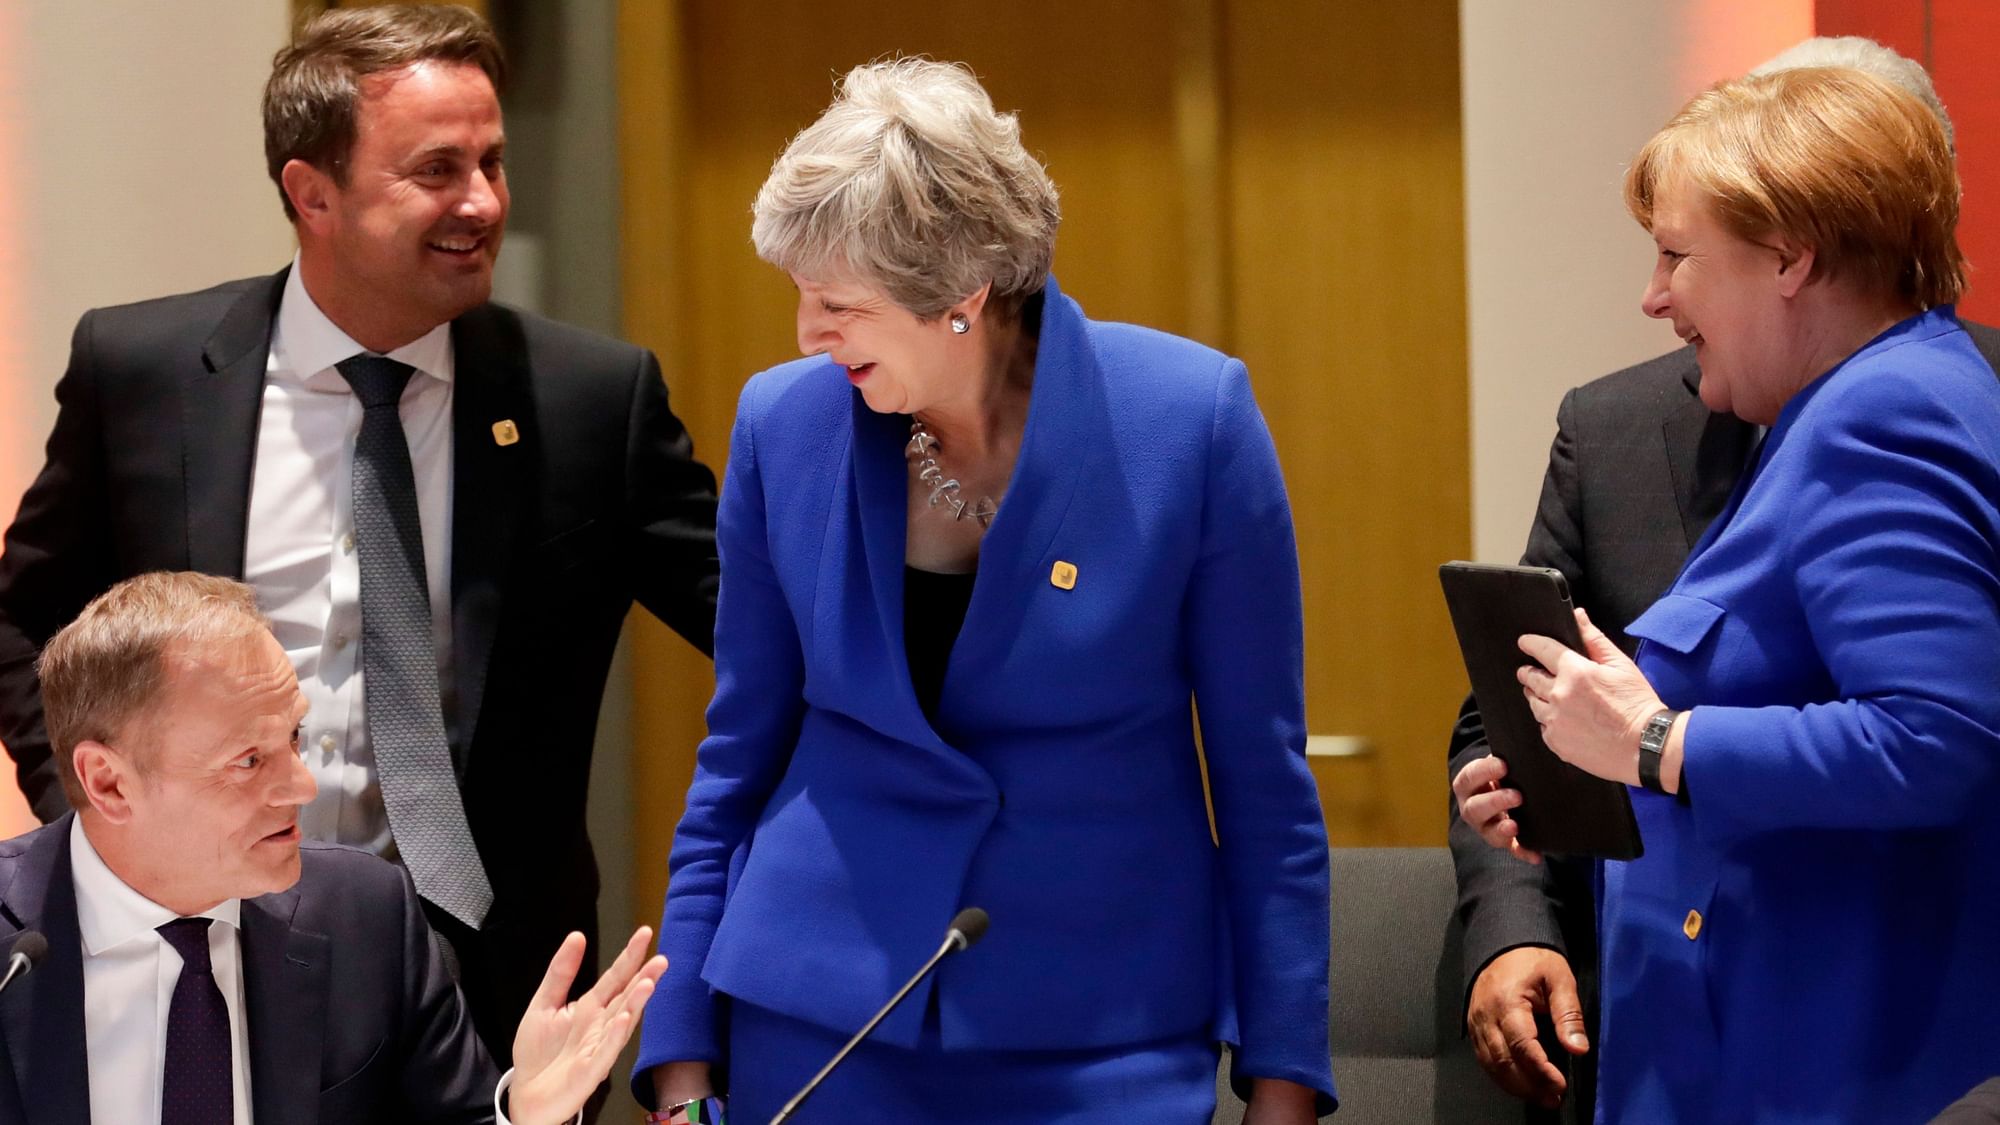 European Council President Donald Tusk (left) speaks with British Prime Minister Theresa May (center) German Chancellor Angela Merkel (right) and Luxembourg’s Prime Minister Xavier Bettel.